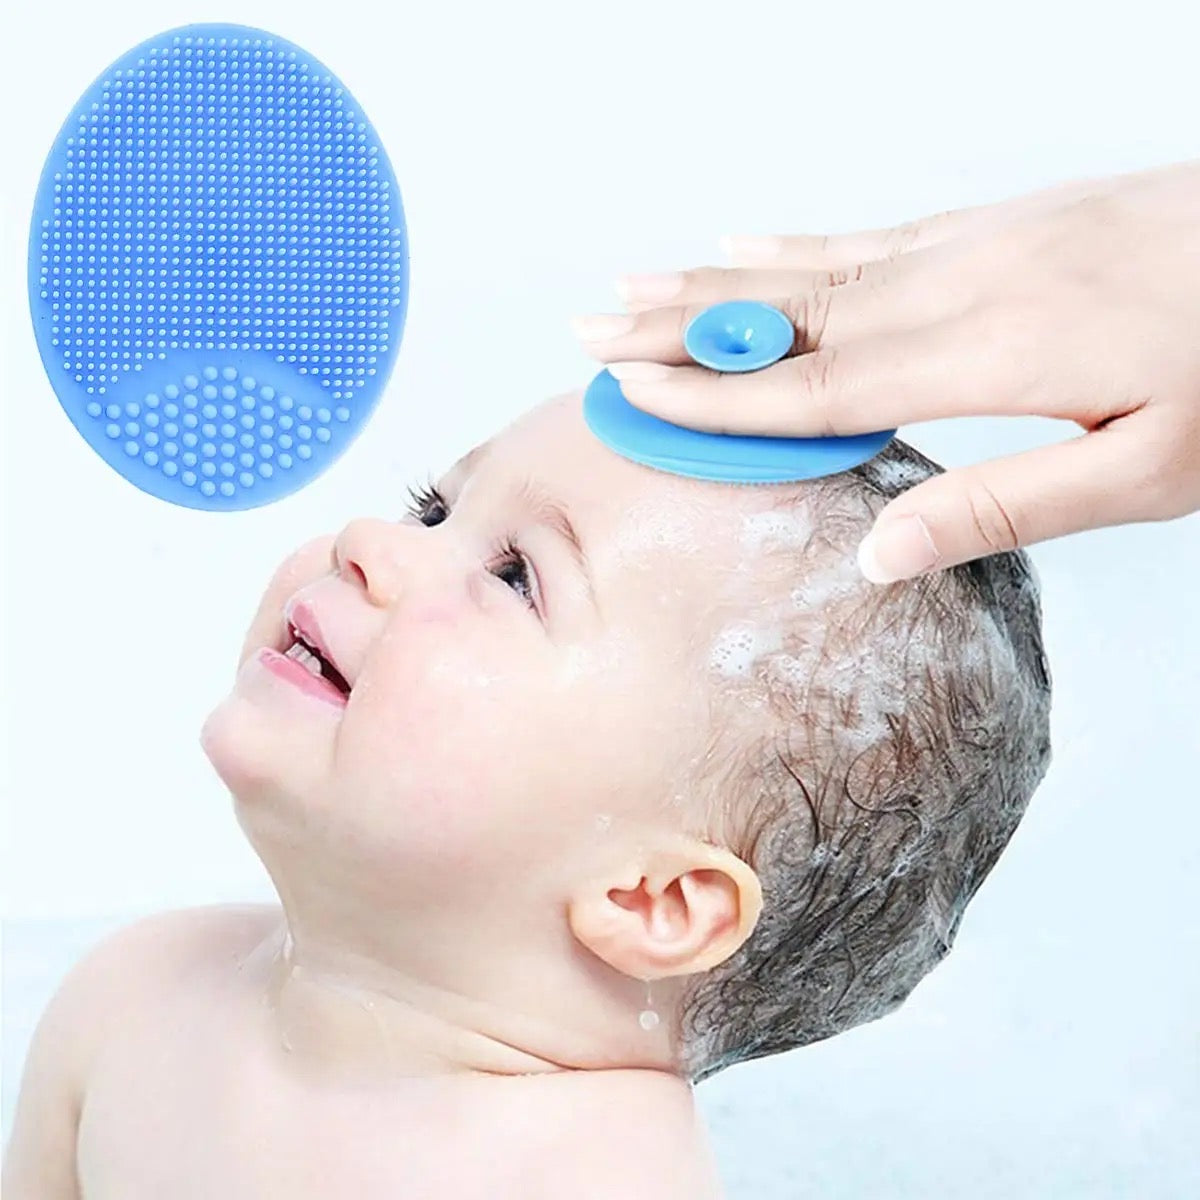  A baby is being bathed with using the Kids Soft Silicone Shower Brush, a gentle and effective tool for deep pore cleaning and exfoliating skin care